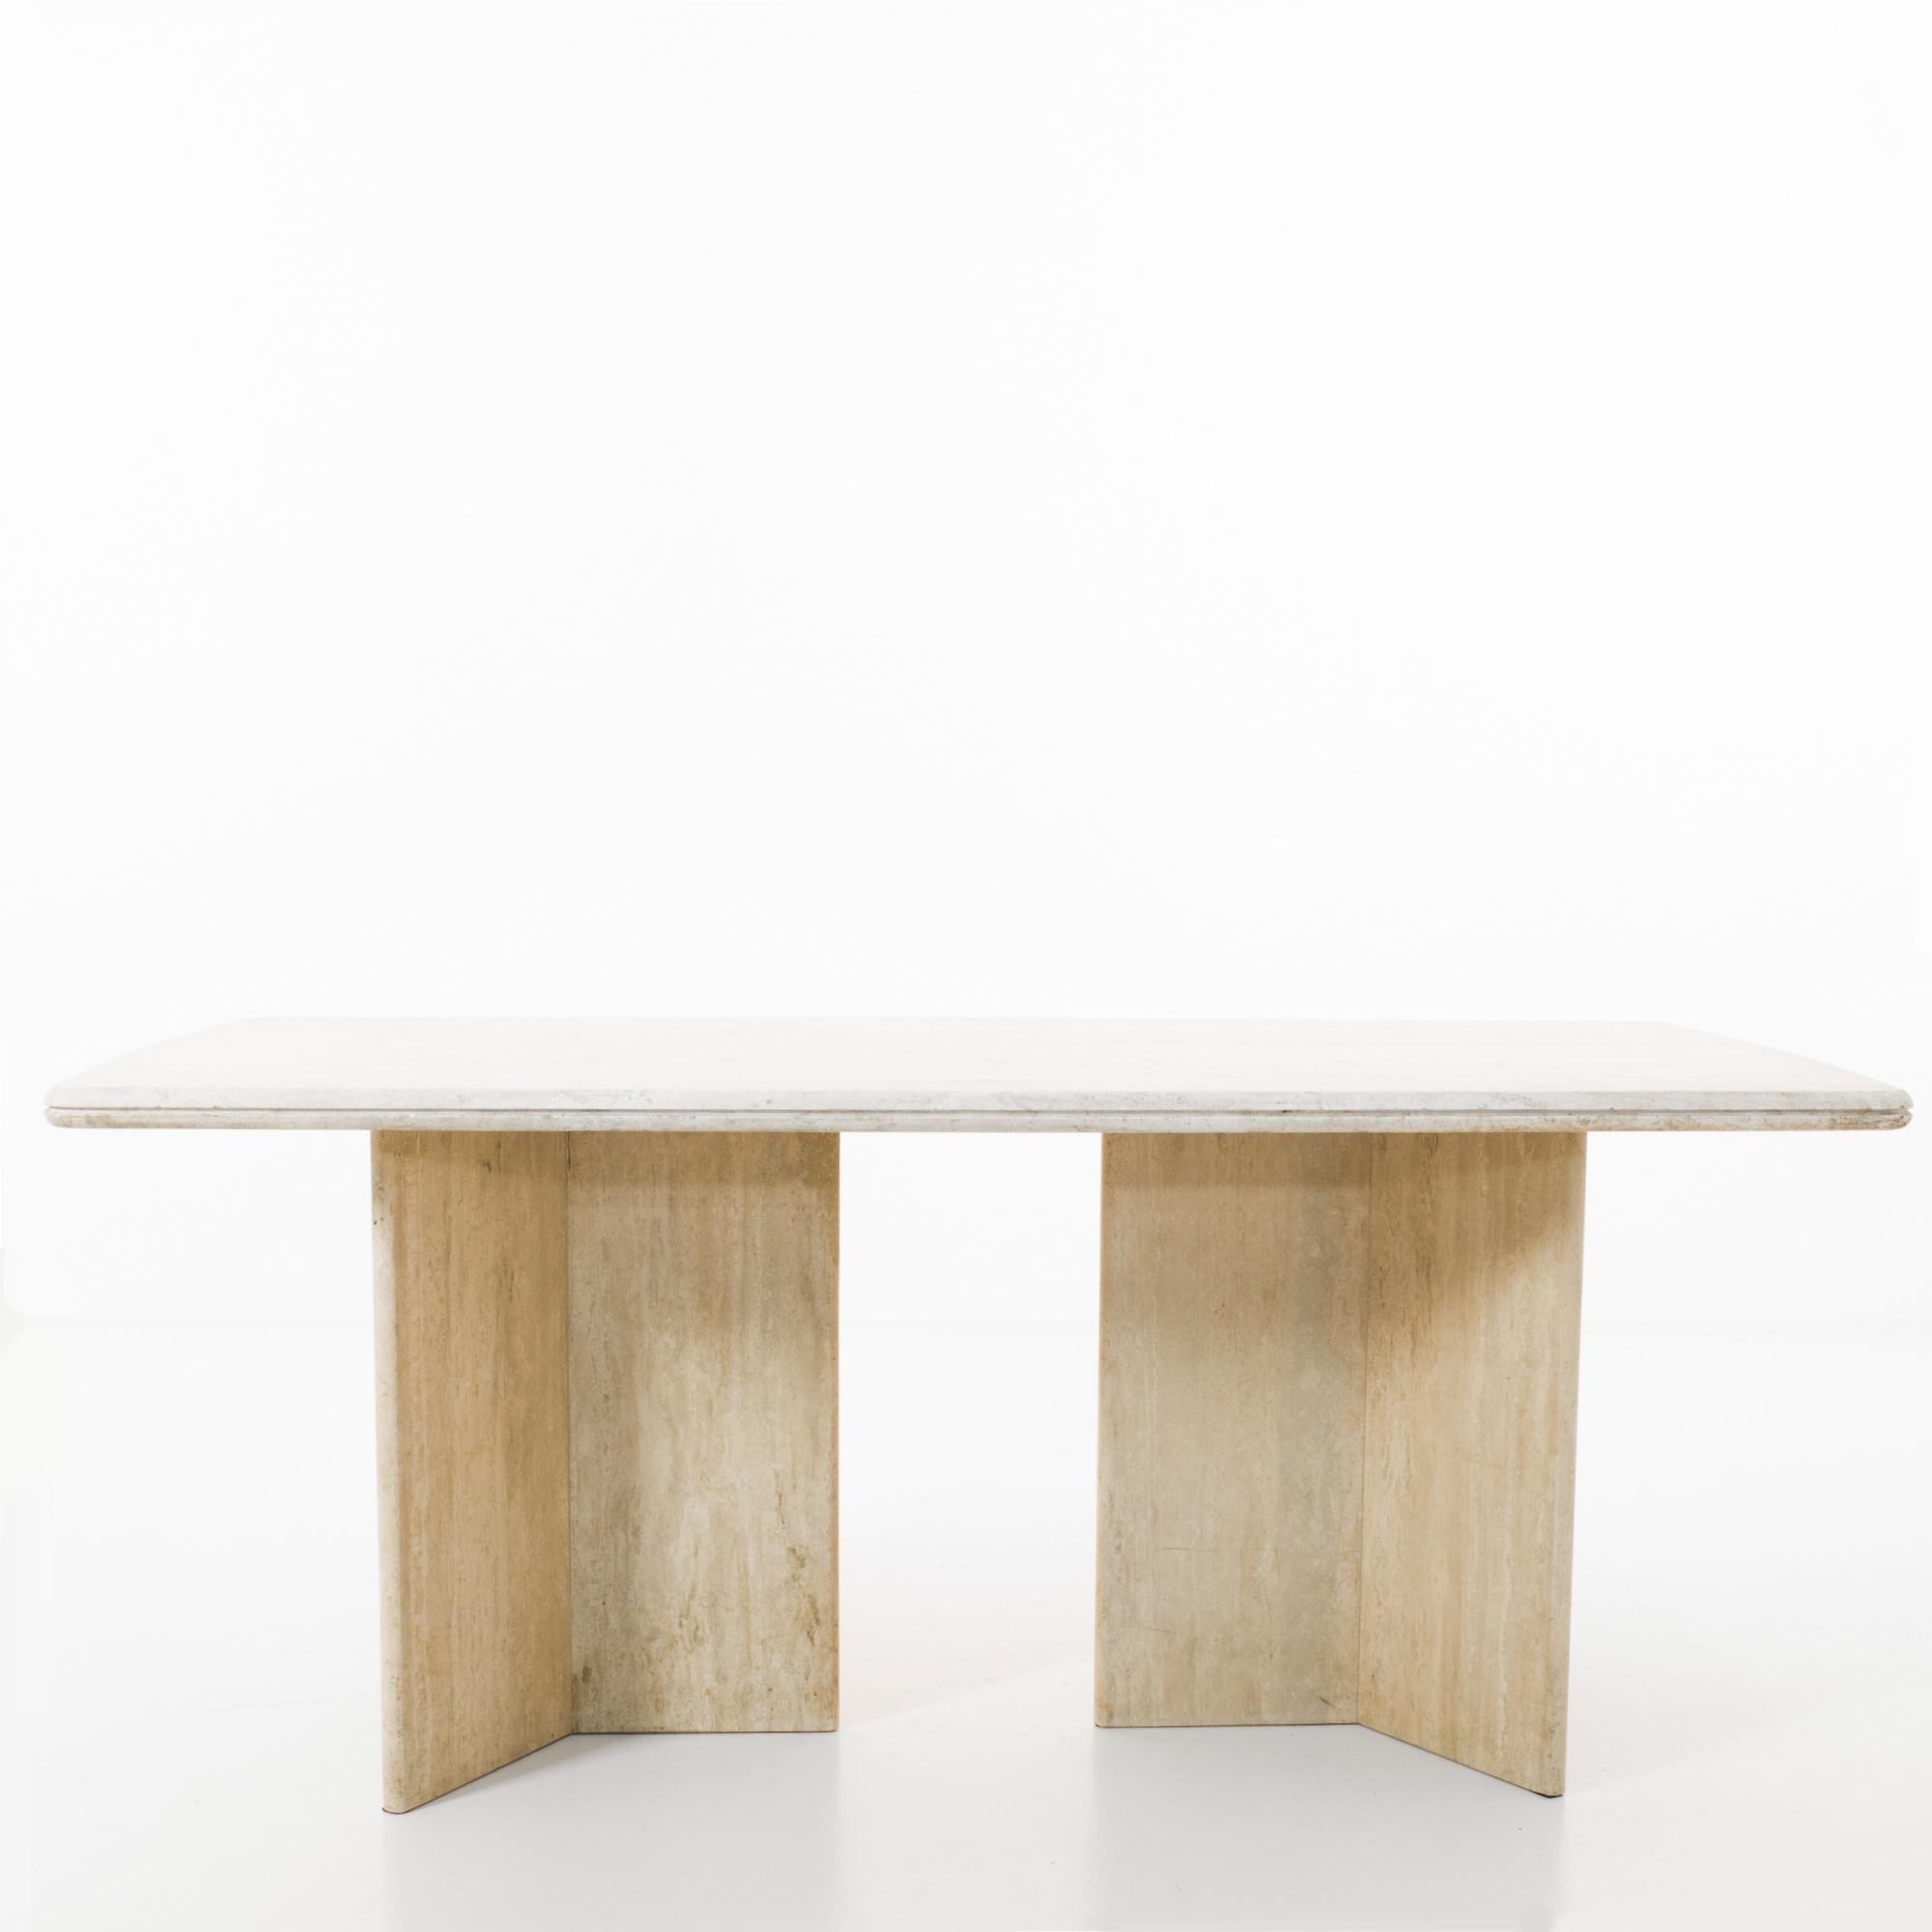 A marble dining table produced in Italy circa 1970. Standing on two three-point bases, this solid travertine table shall not be moved. The 70 inch tabletop can comfortably fit 6-8 on its sleek two-tone finish that’s been polished till it shines. An